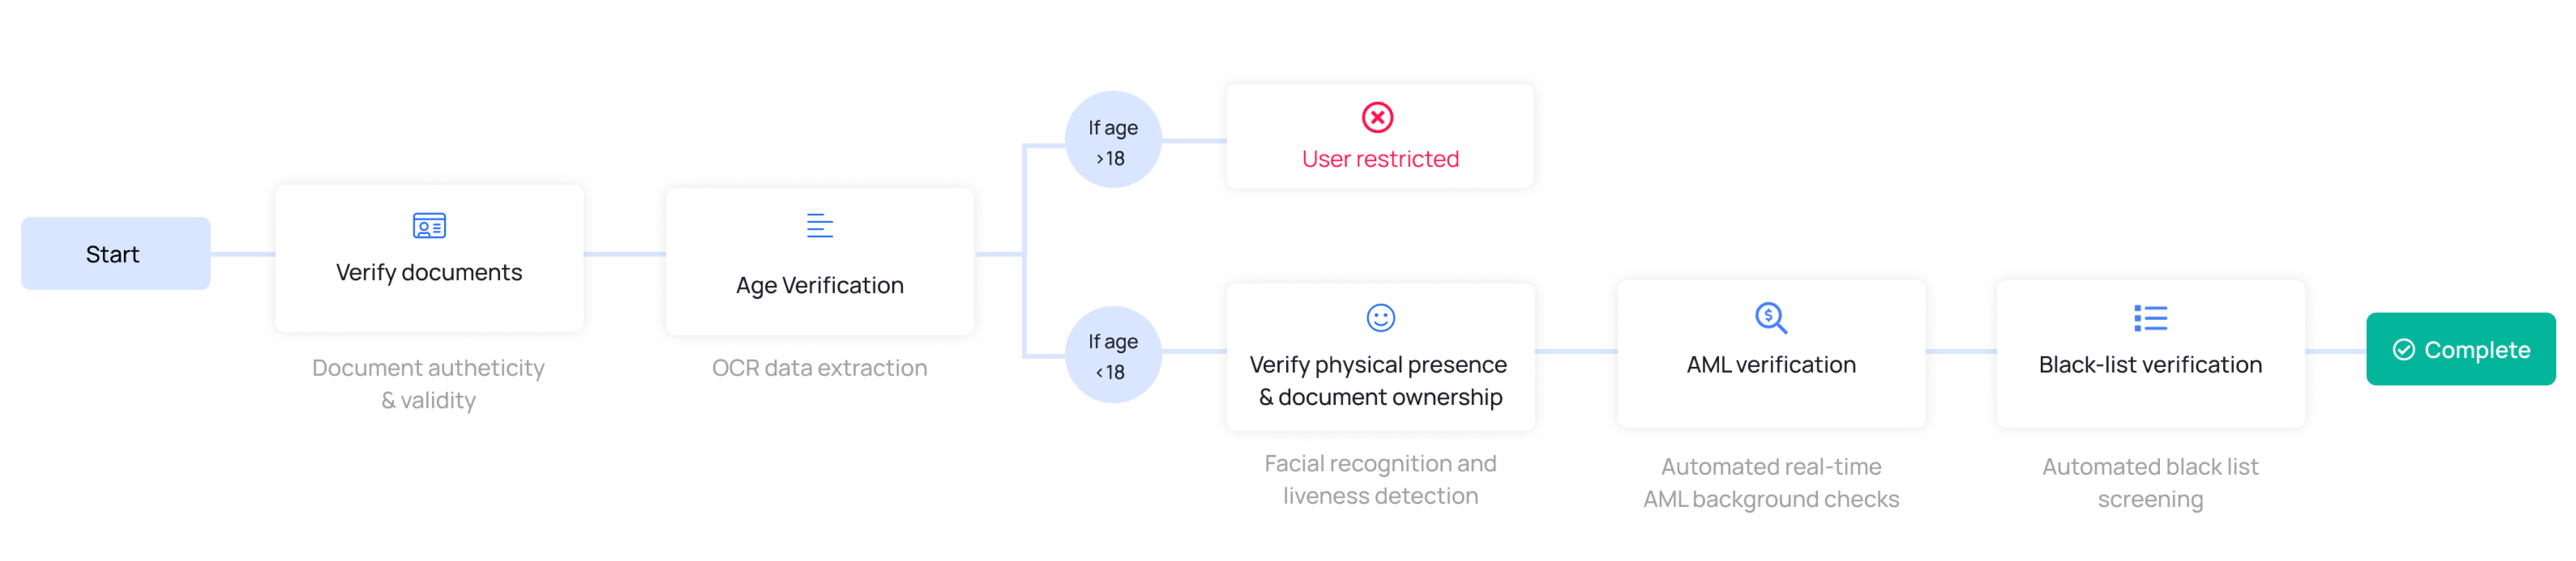 KYC and AML customer journey with automated identity verification